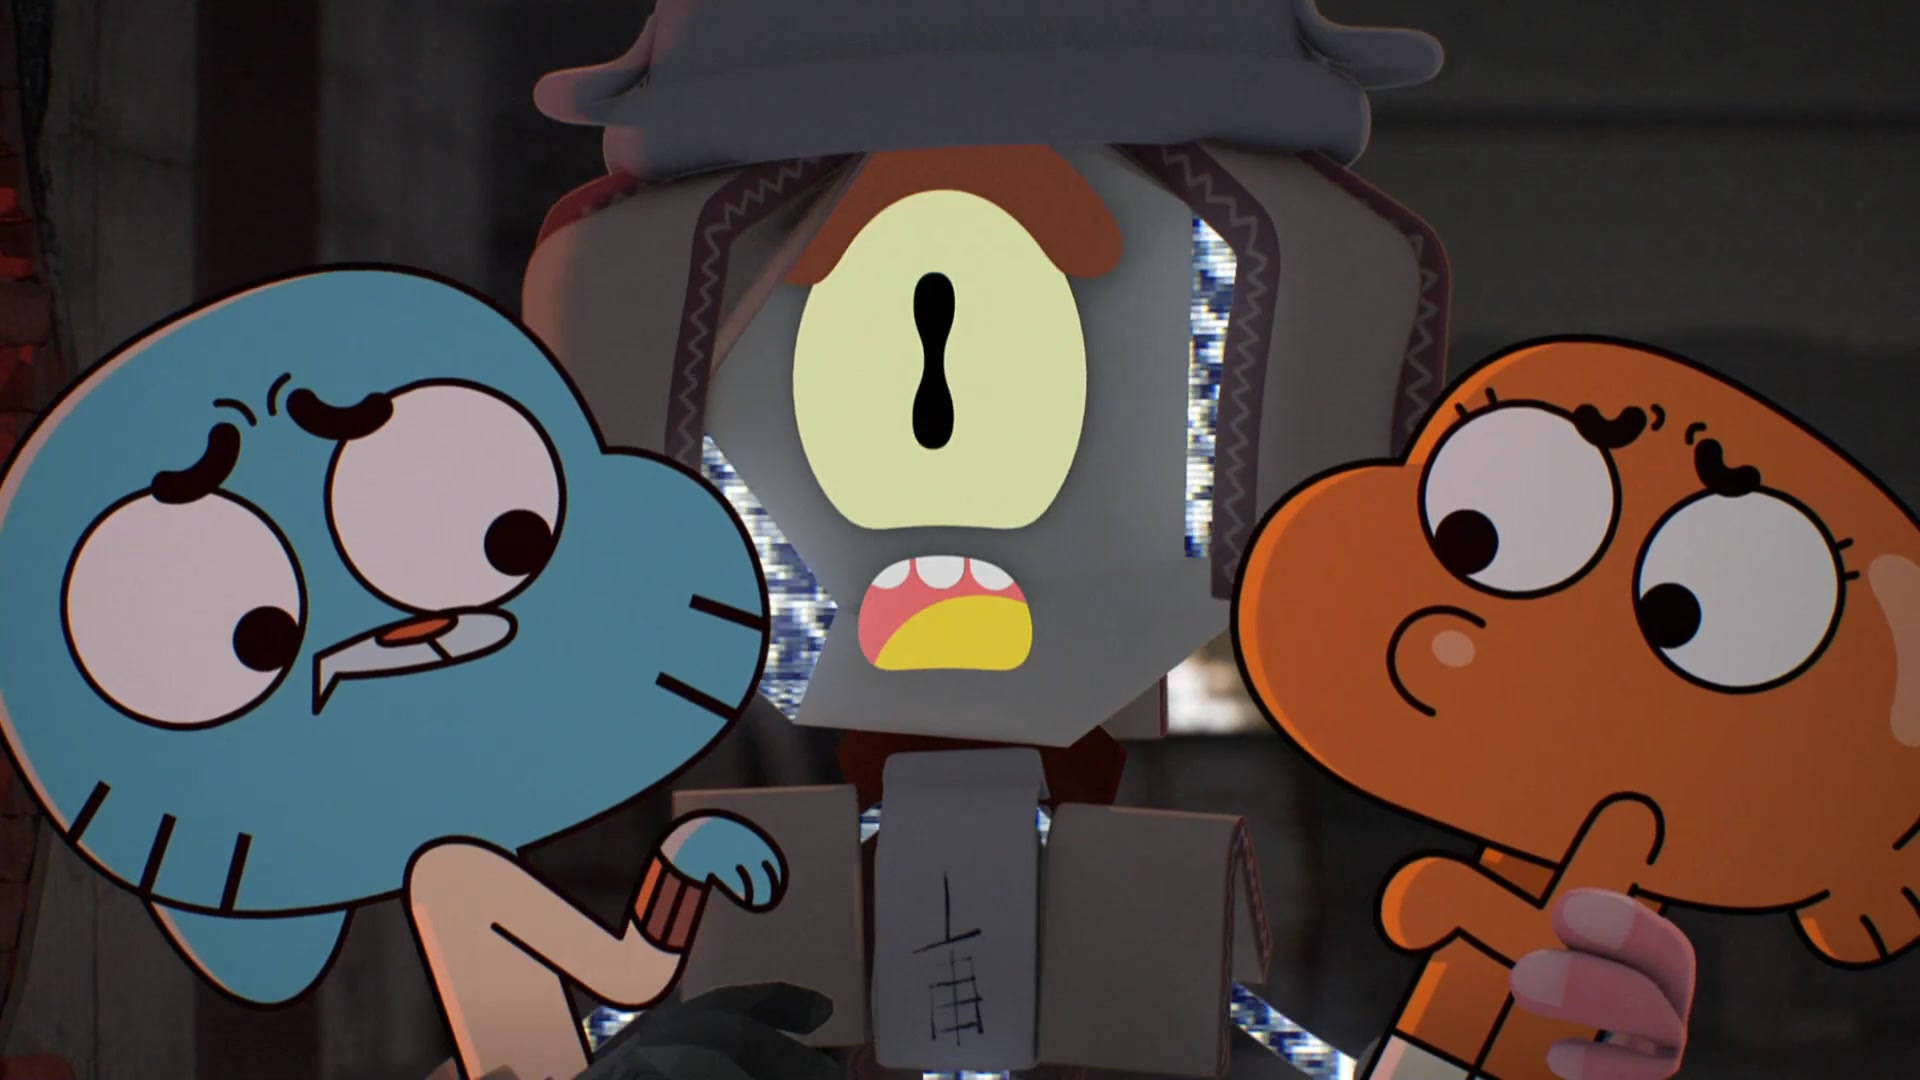 Characters Cartoon GUMBALL - characters CARTOON of your choice